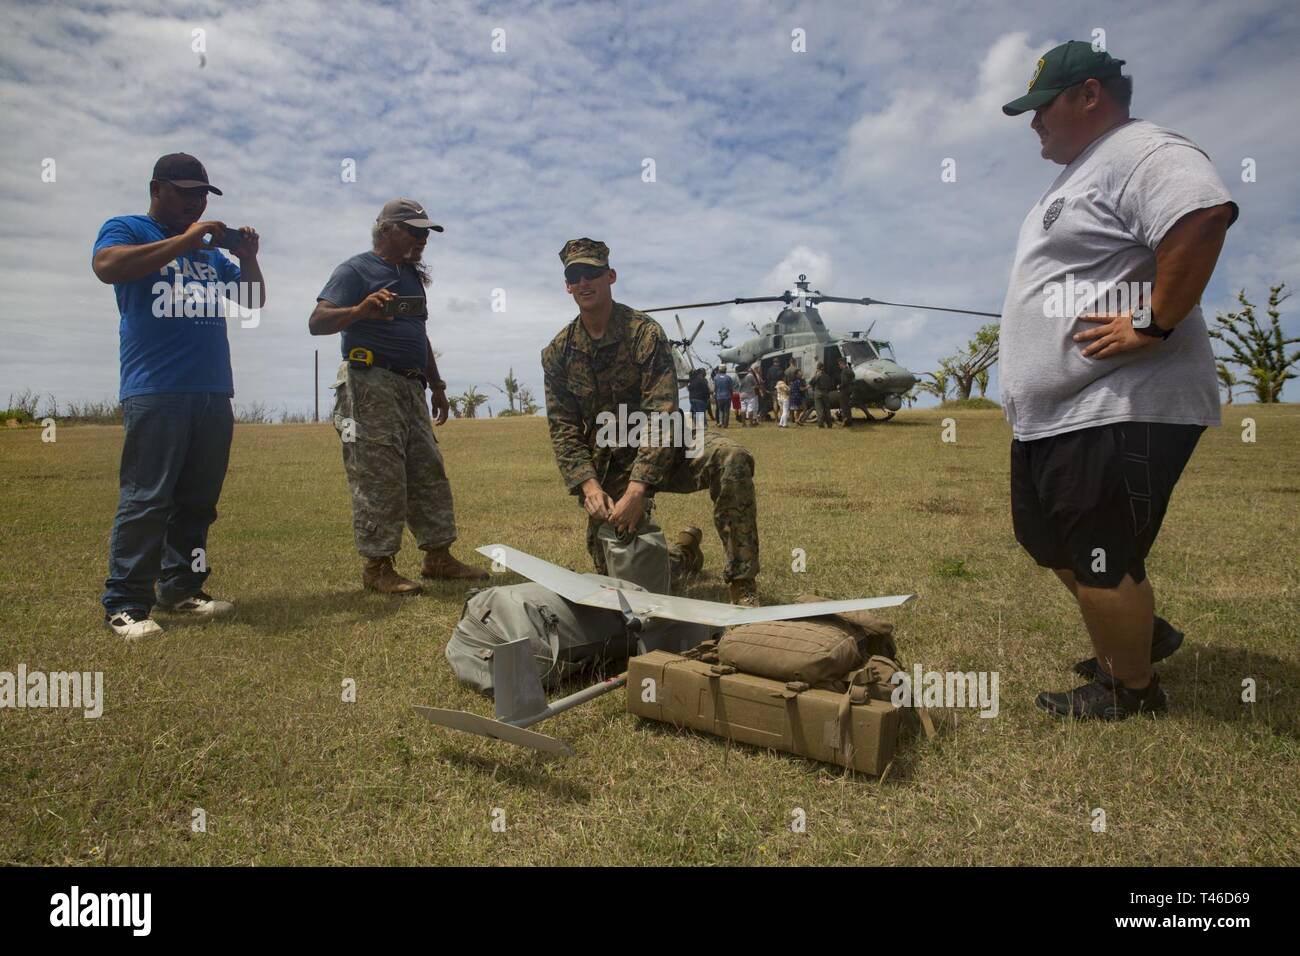 Sgt. Connor Ogara, an intelligence specialist with Alpha Company, Battalion Landing Team, 1st Battalion, 4th Marines, showcases an unmanned aerial system for residents of Tinian, Commonwealth of the Northern Mariana Islands, March 11, 2019. Marines and Sailors with Combat Logistics Battalion 31 led a multi-service task force, partnering with the Federal Emergency Management Agency, to help the U.S. citizens of Tinian begin recovery efforts in the wake of Super Typhoon Yutu last year. The Marines and Sailors, currently participating in two weeks of unit-level training on nearby Guam, visited Ti Stock Photo